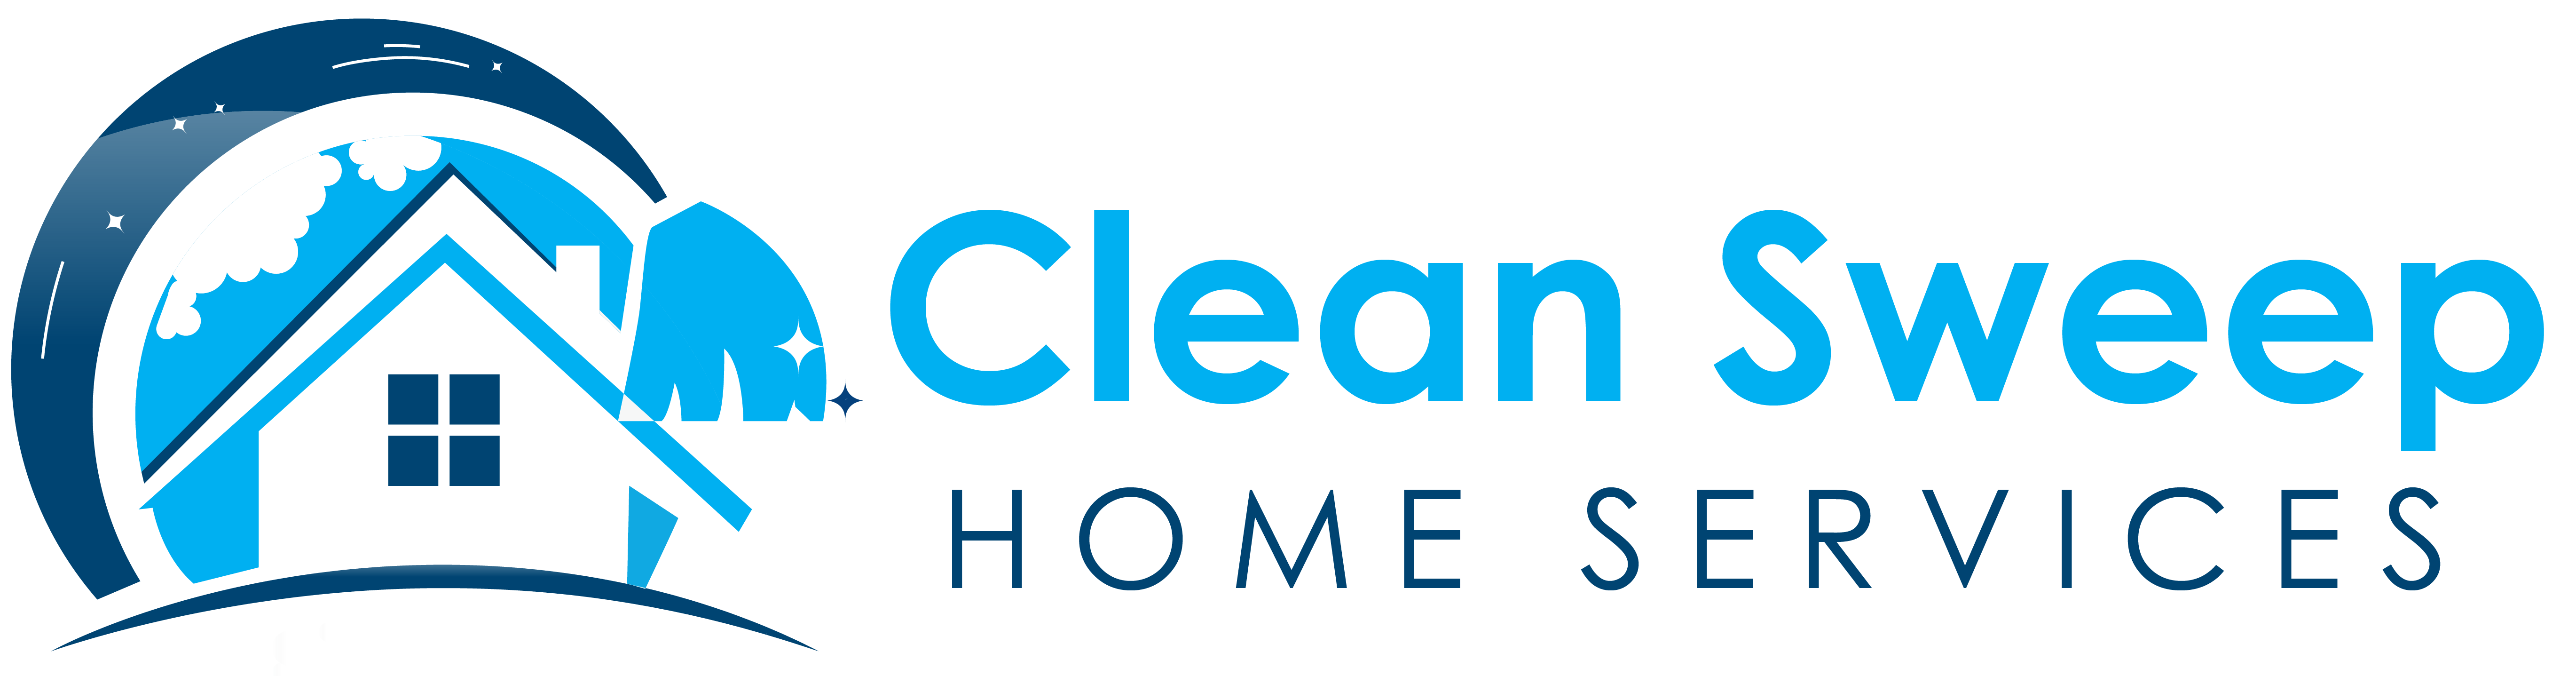 clean sweep home services logo